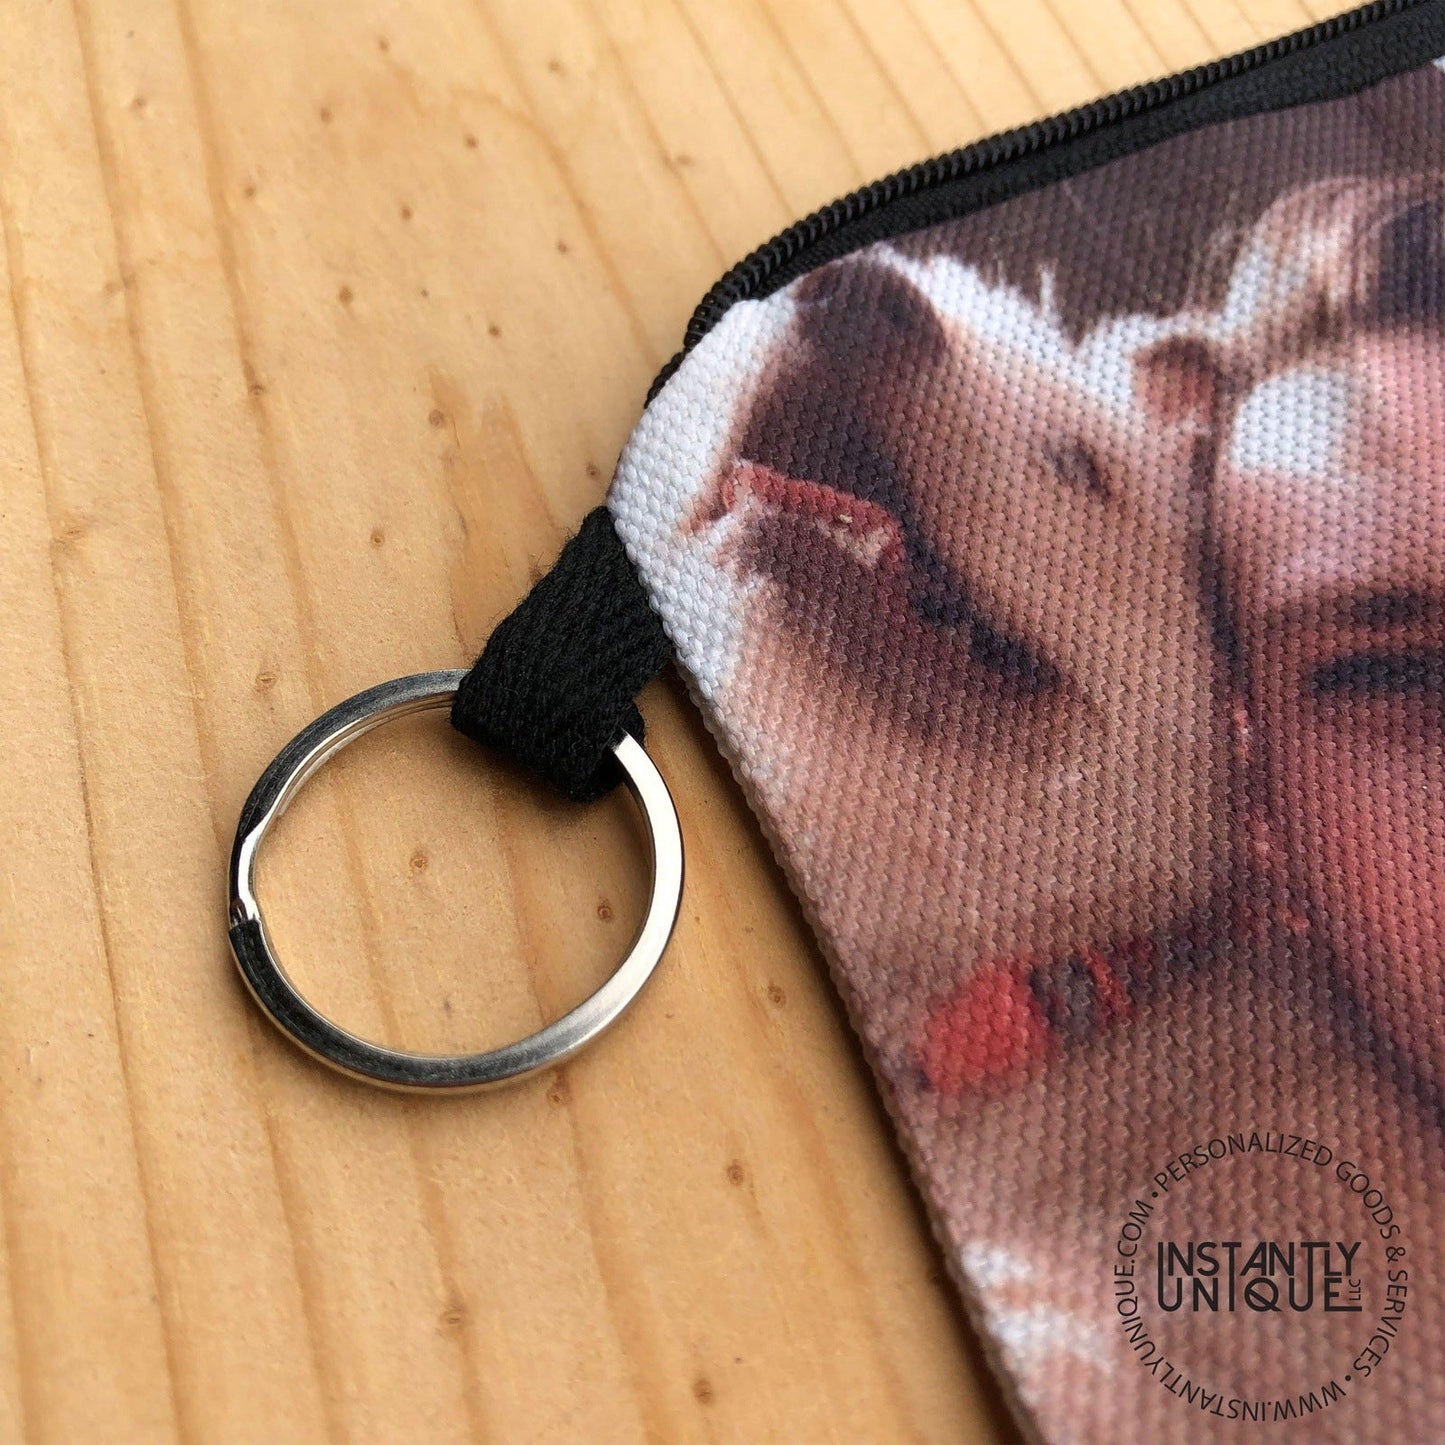 Custom Coin Purse with Pictures - Add your own photos